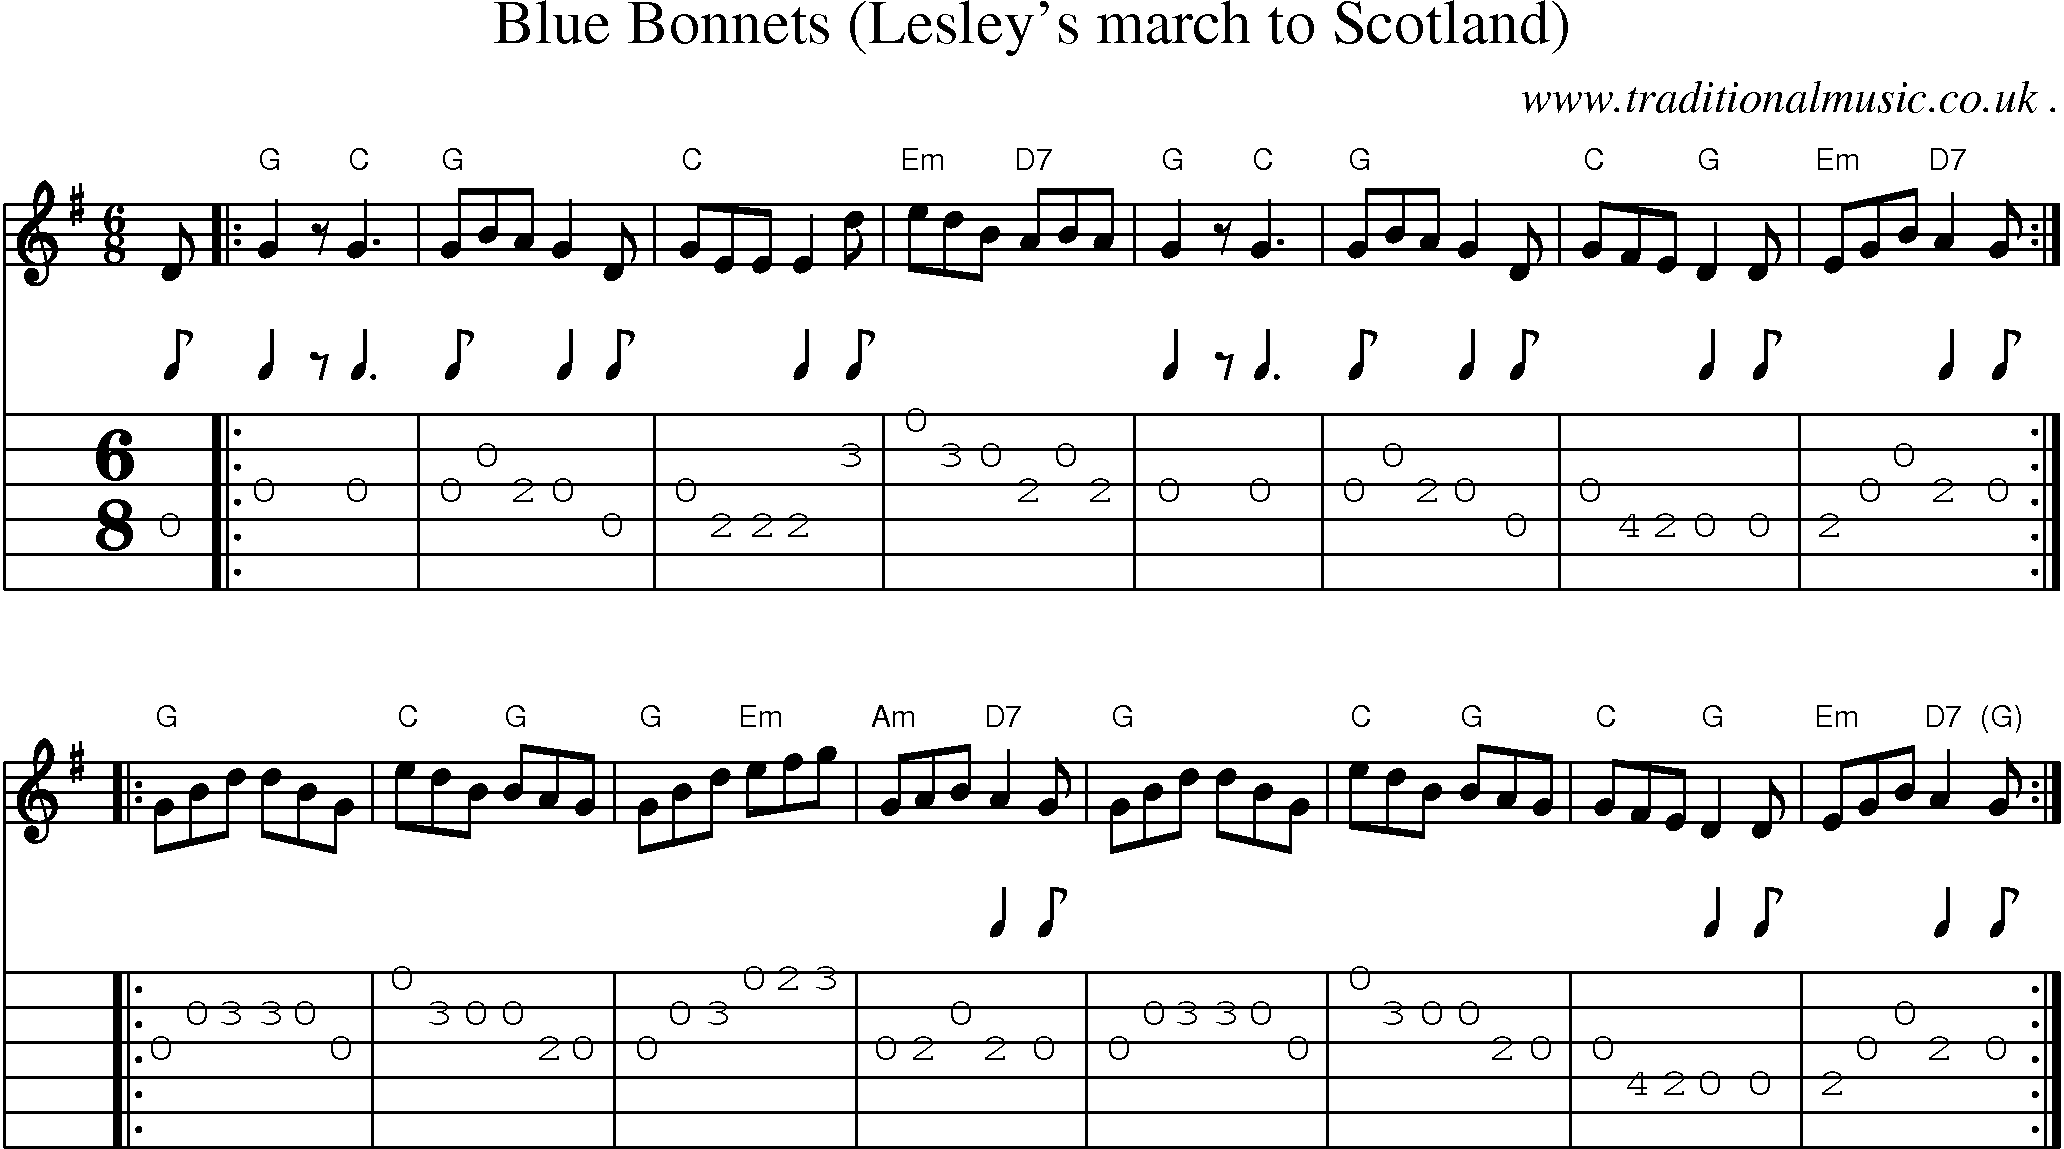 Sheet-music  score, Chords and Guitar Tabs for Blue Bonnets Lesleys March To Scotland